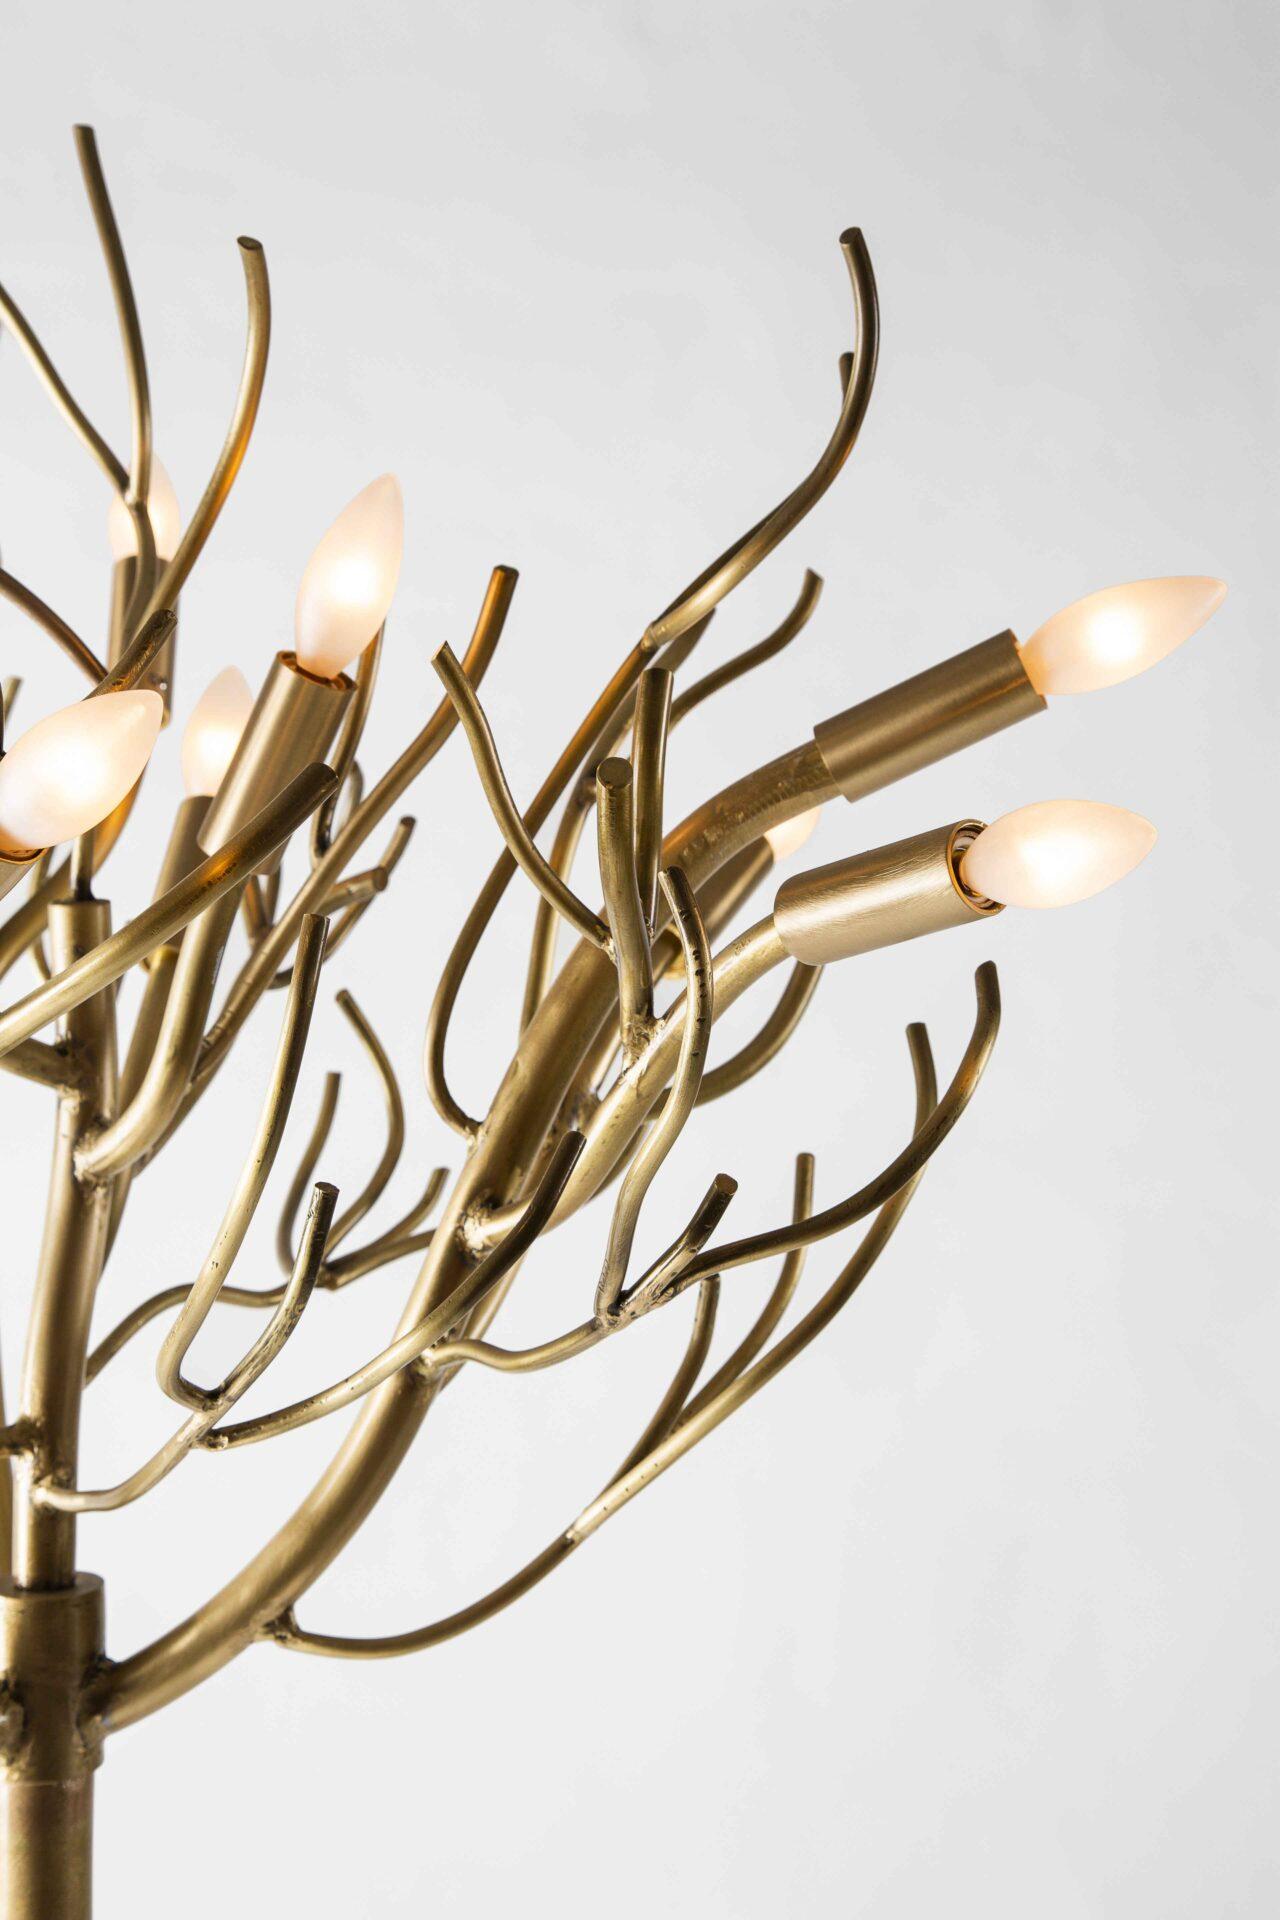 This one-of-a-kind, organic modernist design is crafted entirely by hand and features a series of upswept branches around a slender 